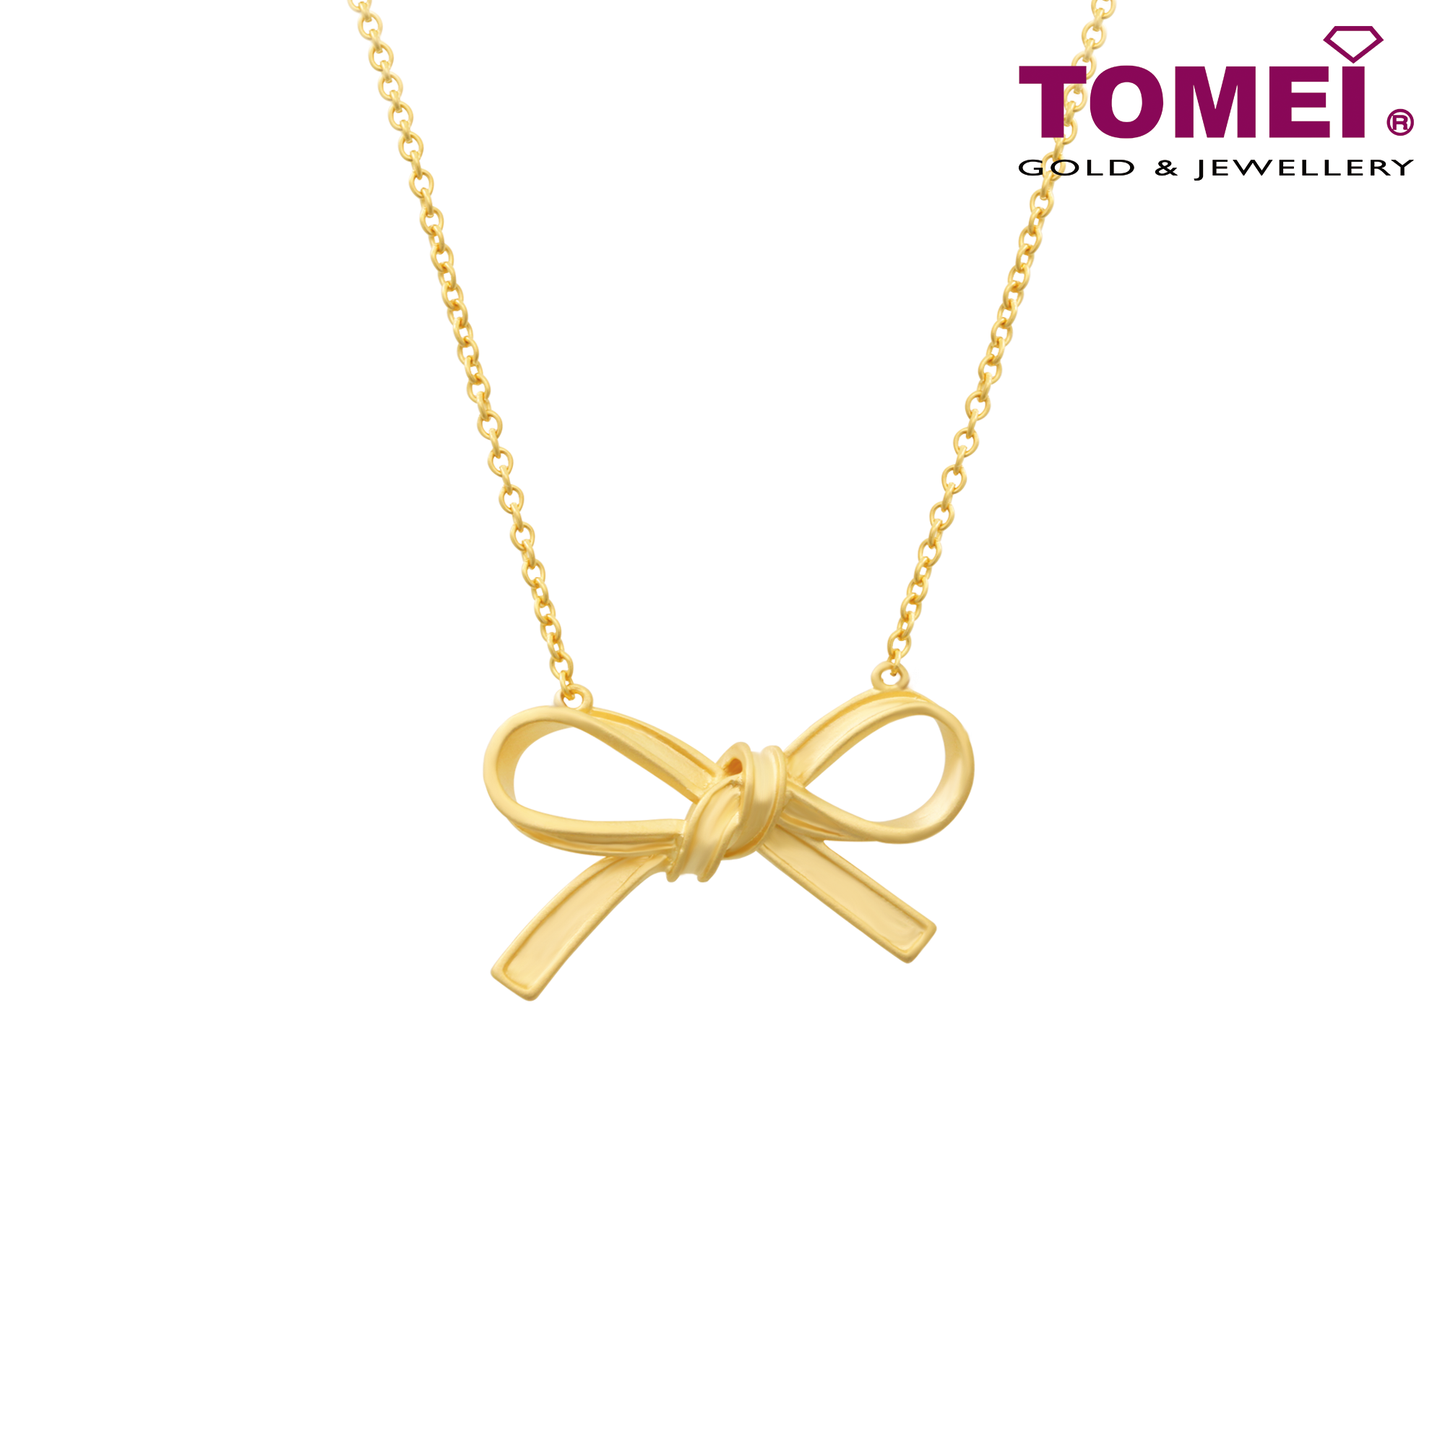 TOMEI Ribbon Bliss Necklace, Yellow Gold 916